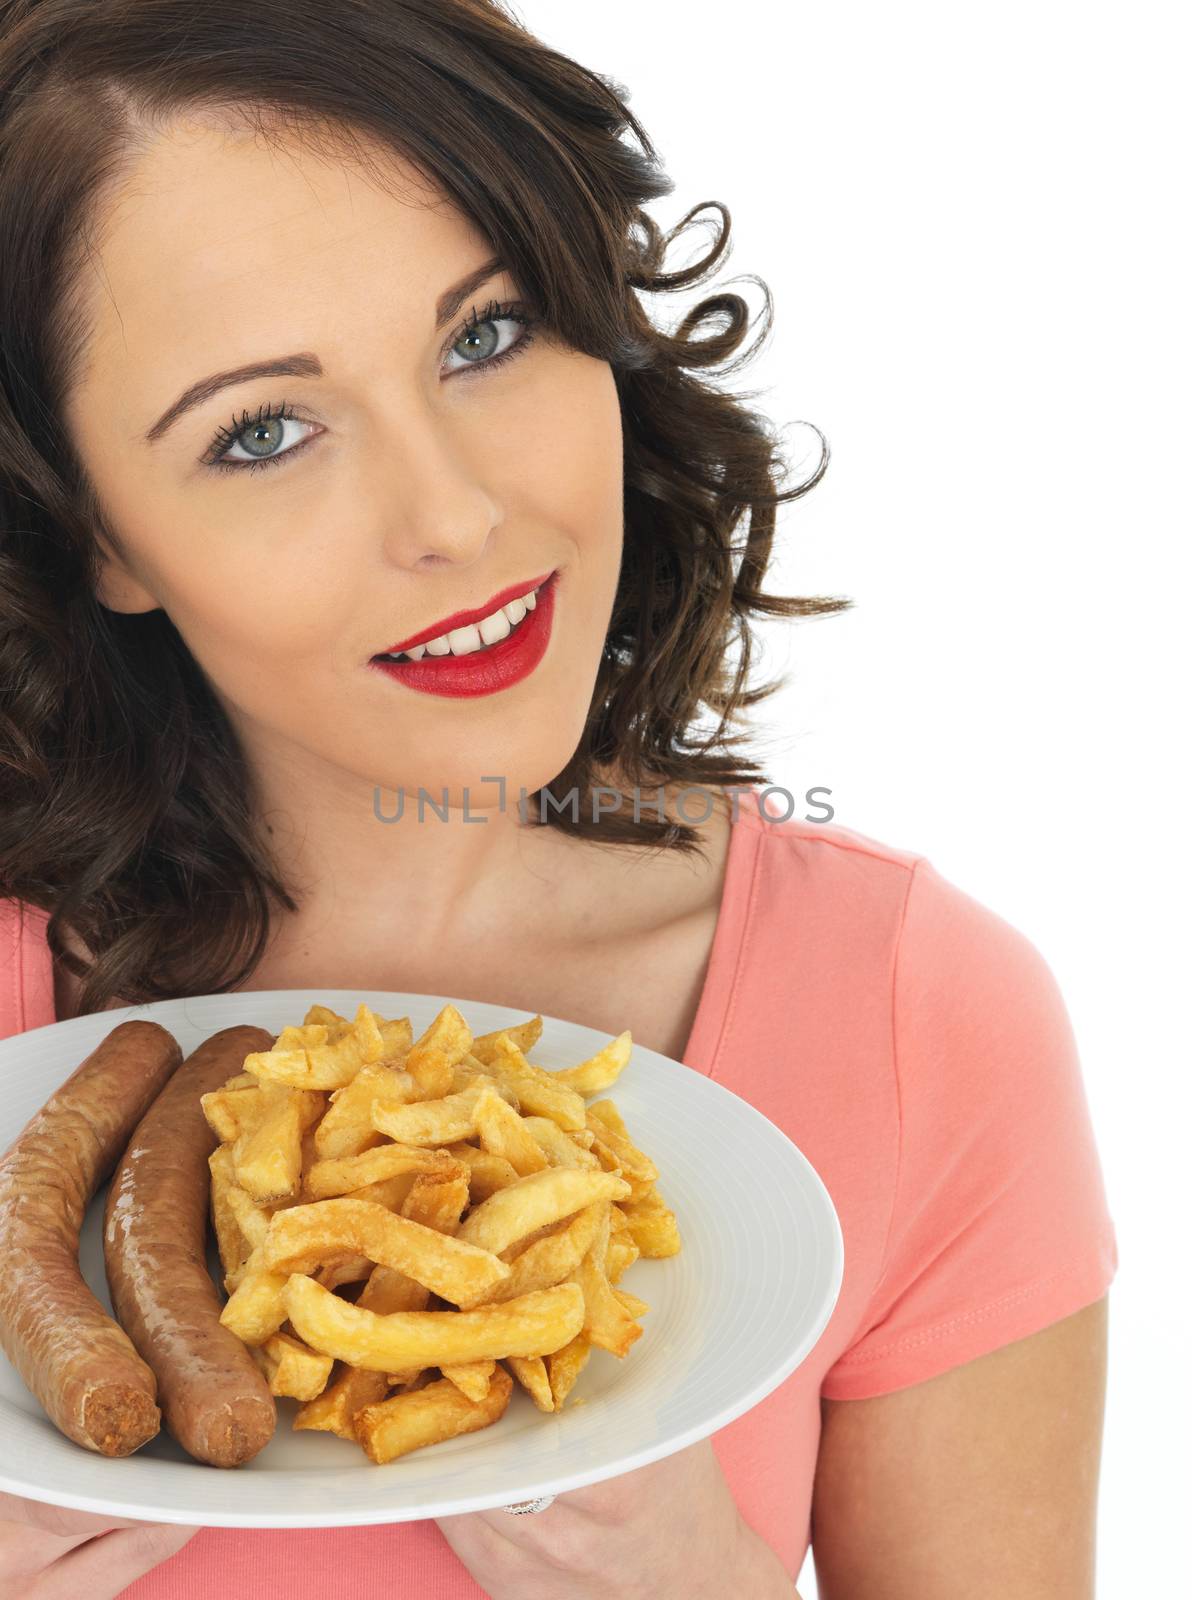 Young Woman Eating Jumbo Sausage and Chips by Whiteboxmedia